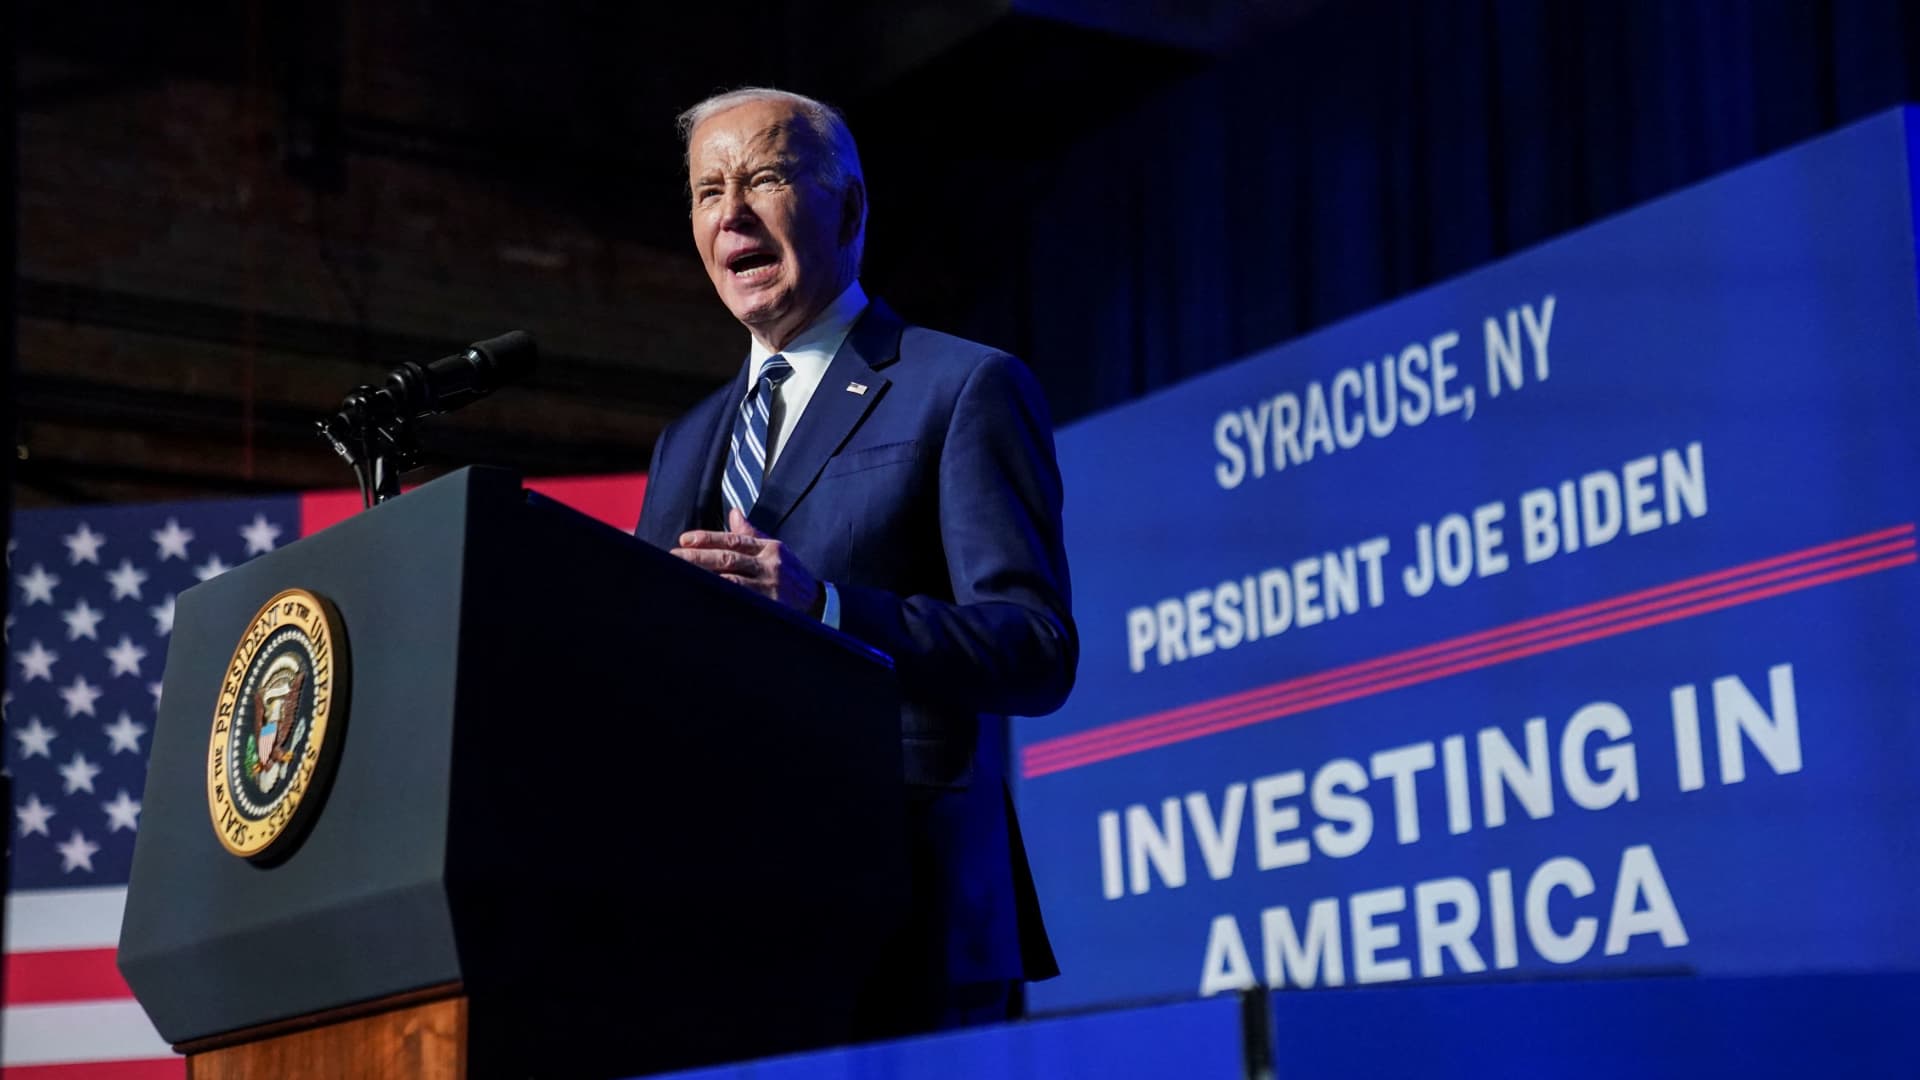 Biden administration faces onslaught of lawsuits as business groups claim regulatory overreach thumbnail